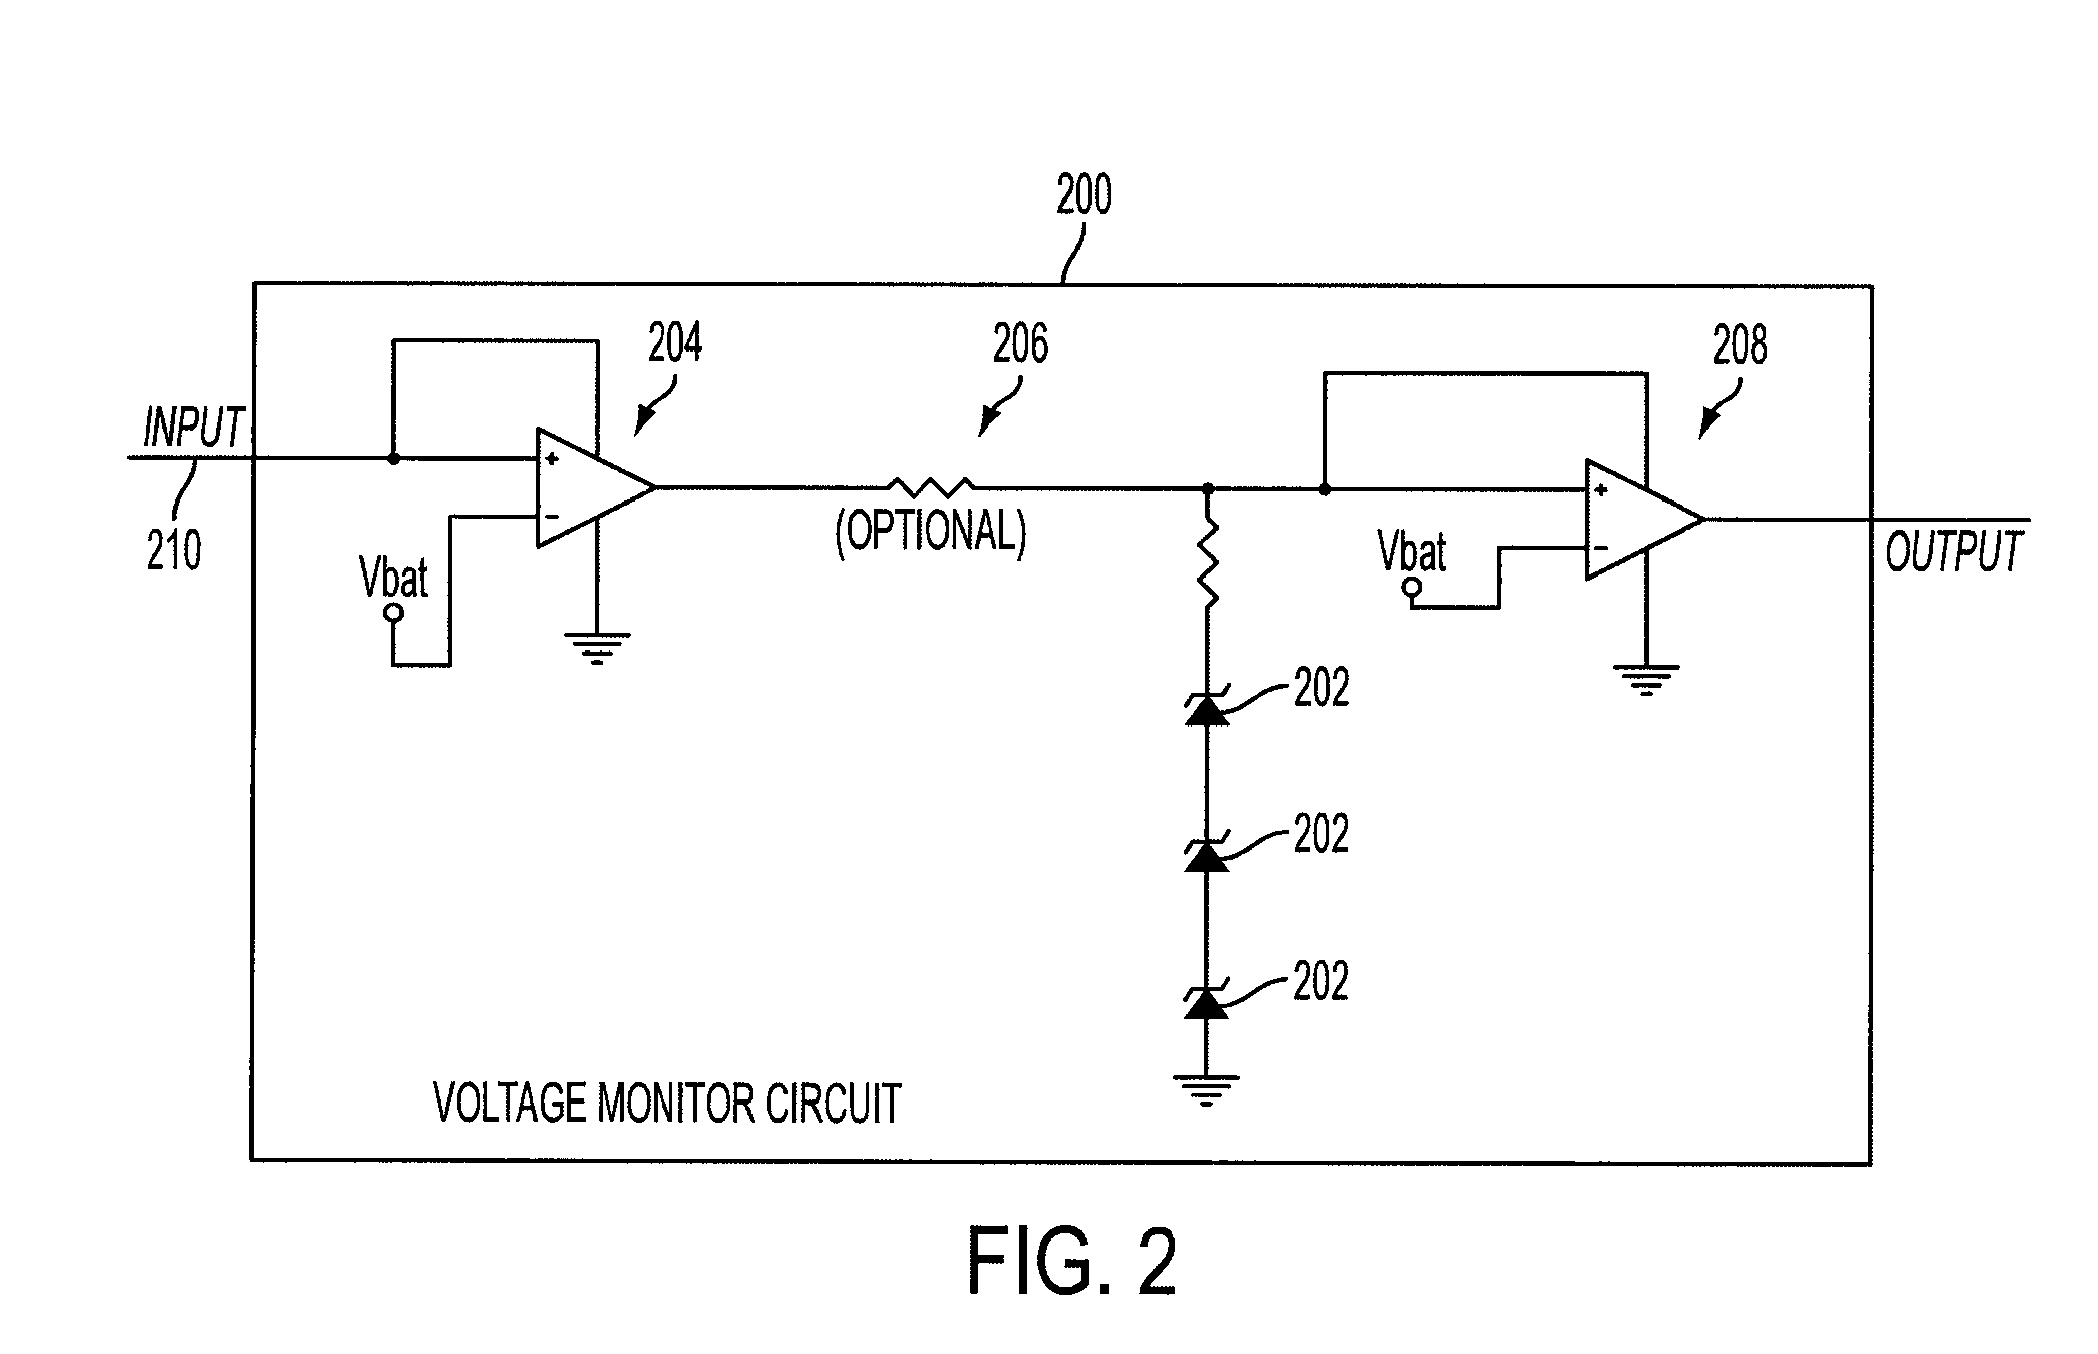 Passive over/under voltage control and protection for energy storage devices associated with energy harvesting